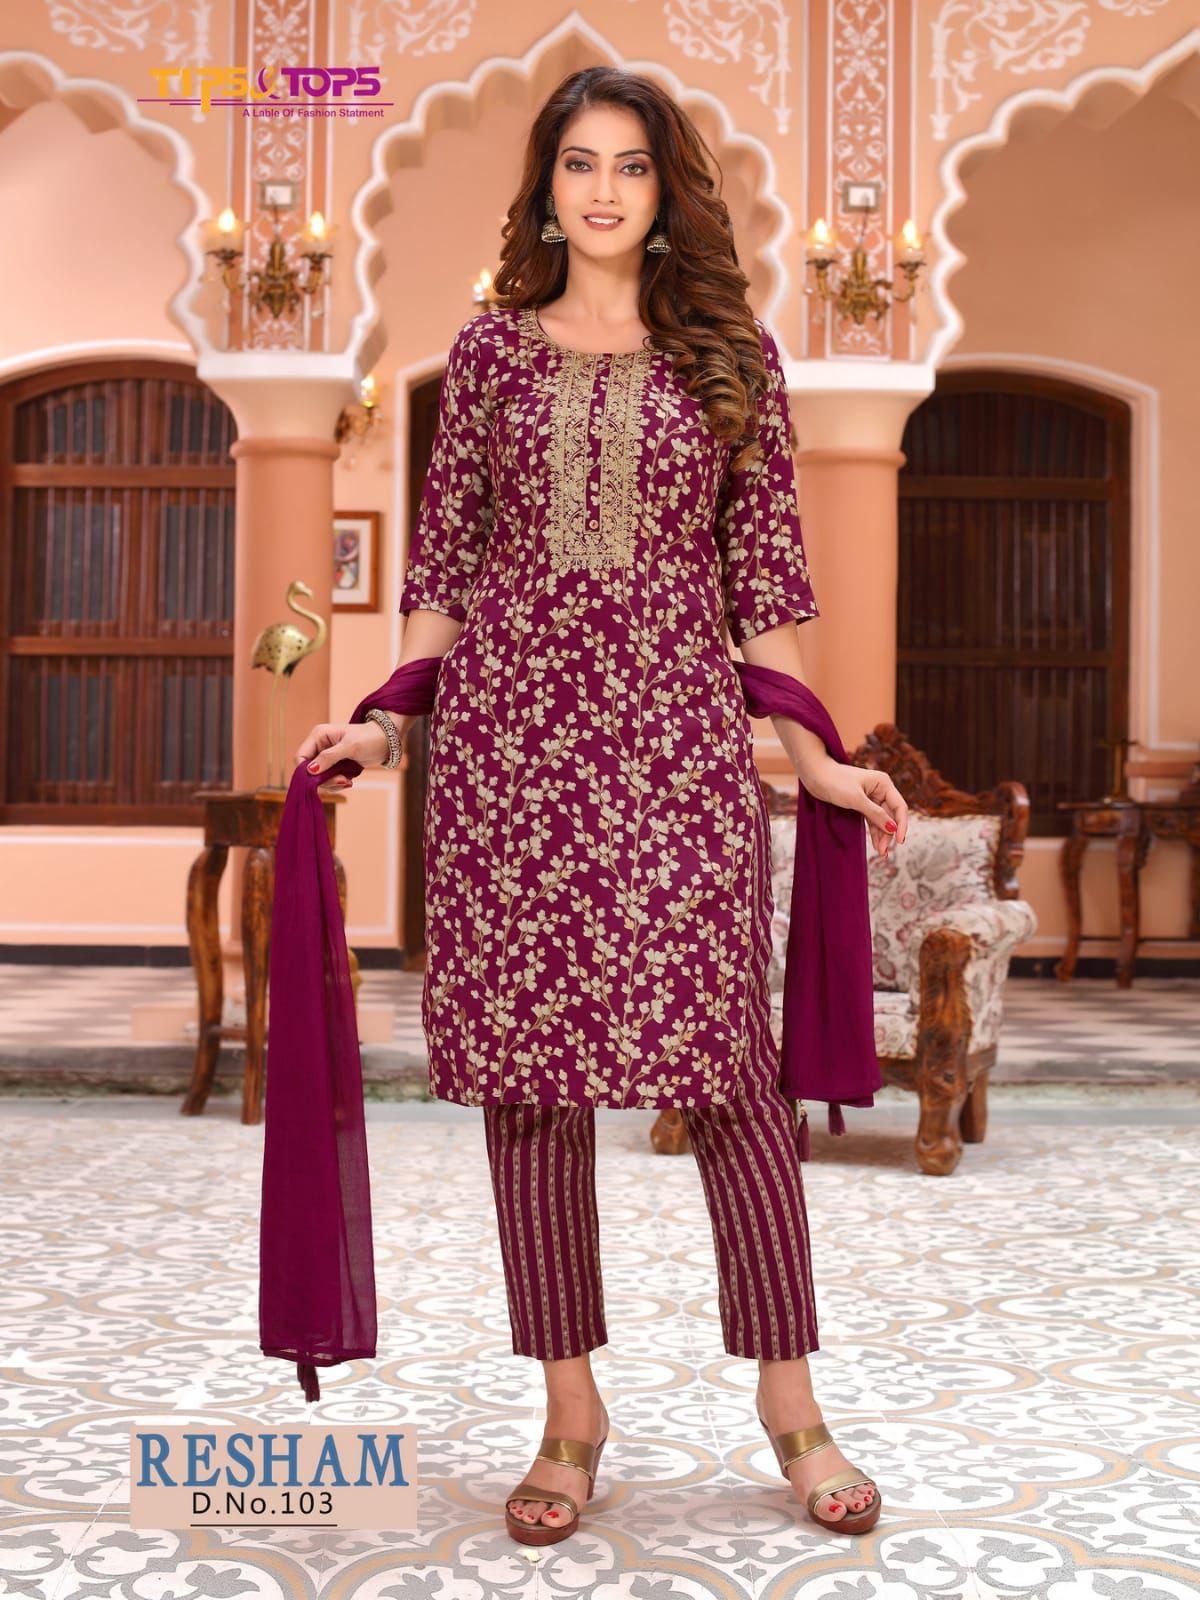 Tips And Tops Resham collection 3